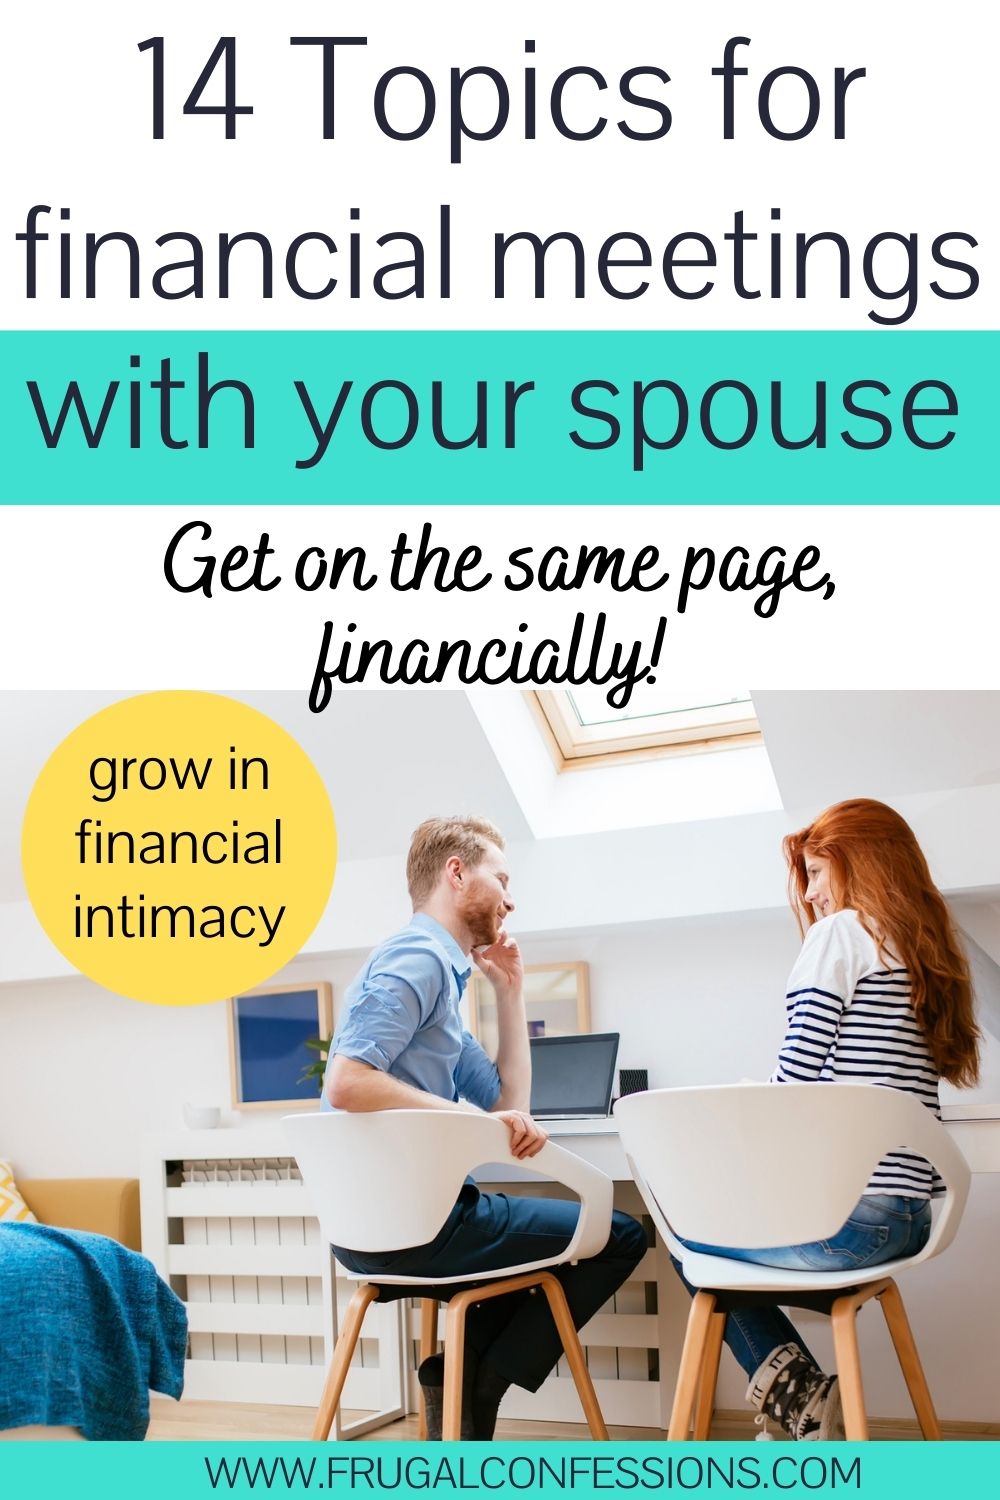 couple sitting in white chairs, talking about money, text overlay "14 topics for financial meetings with your spouse"